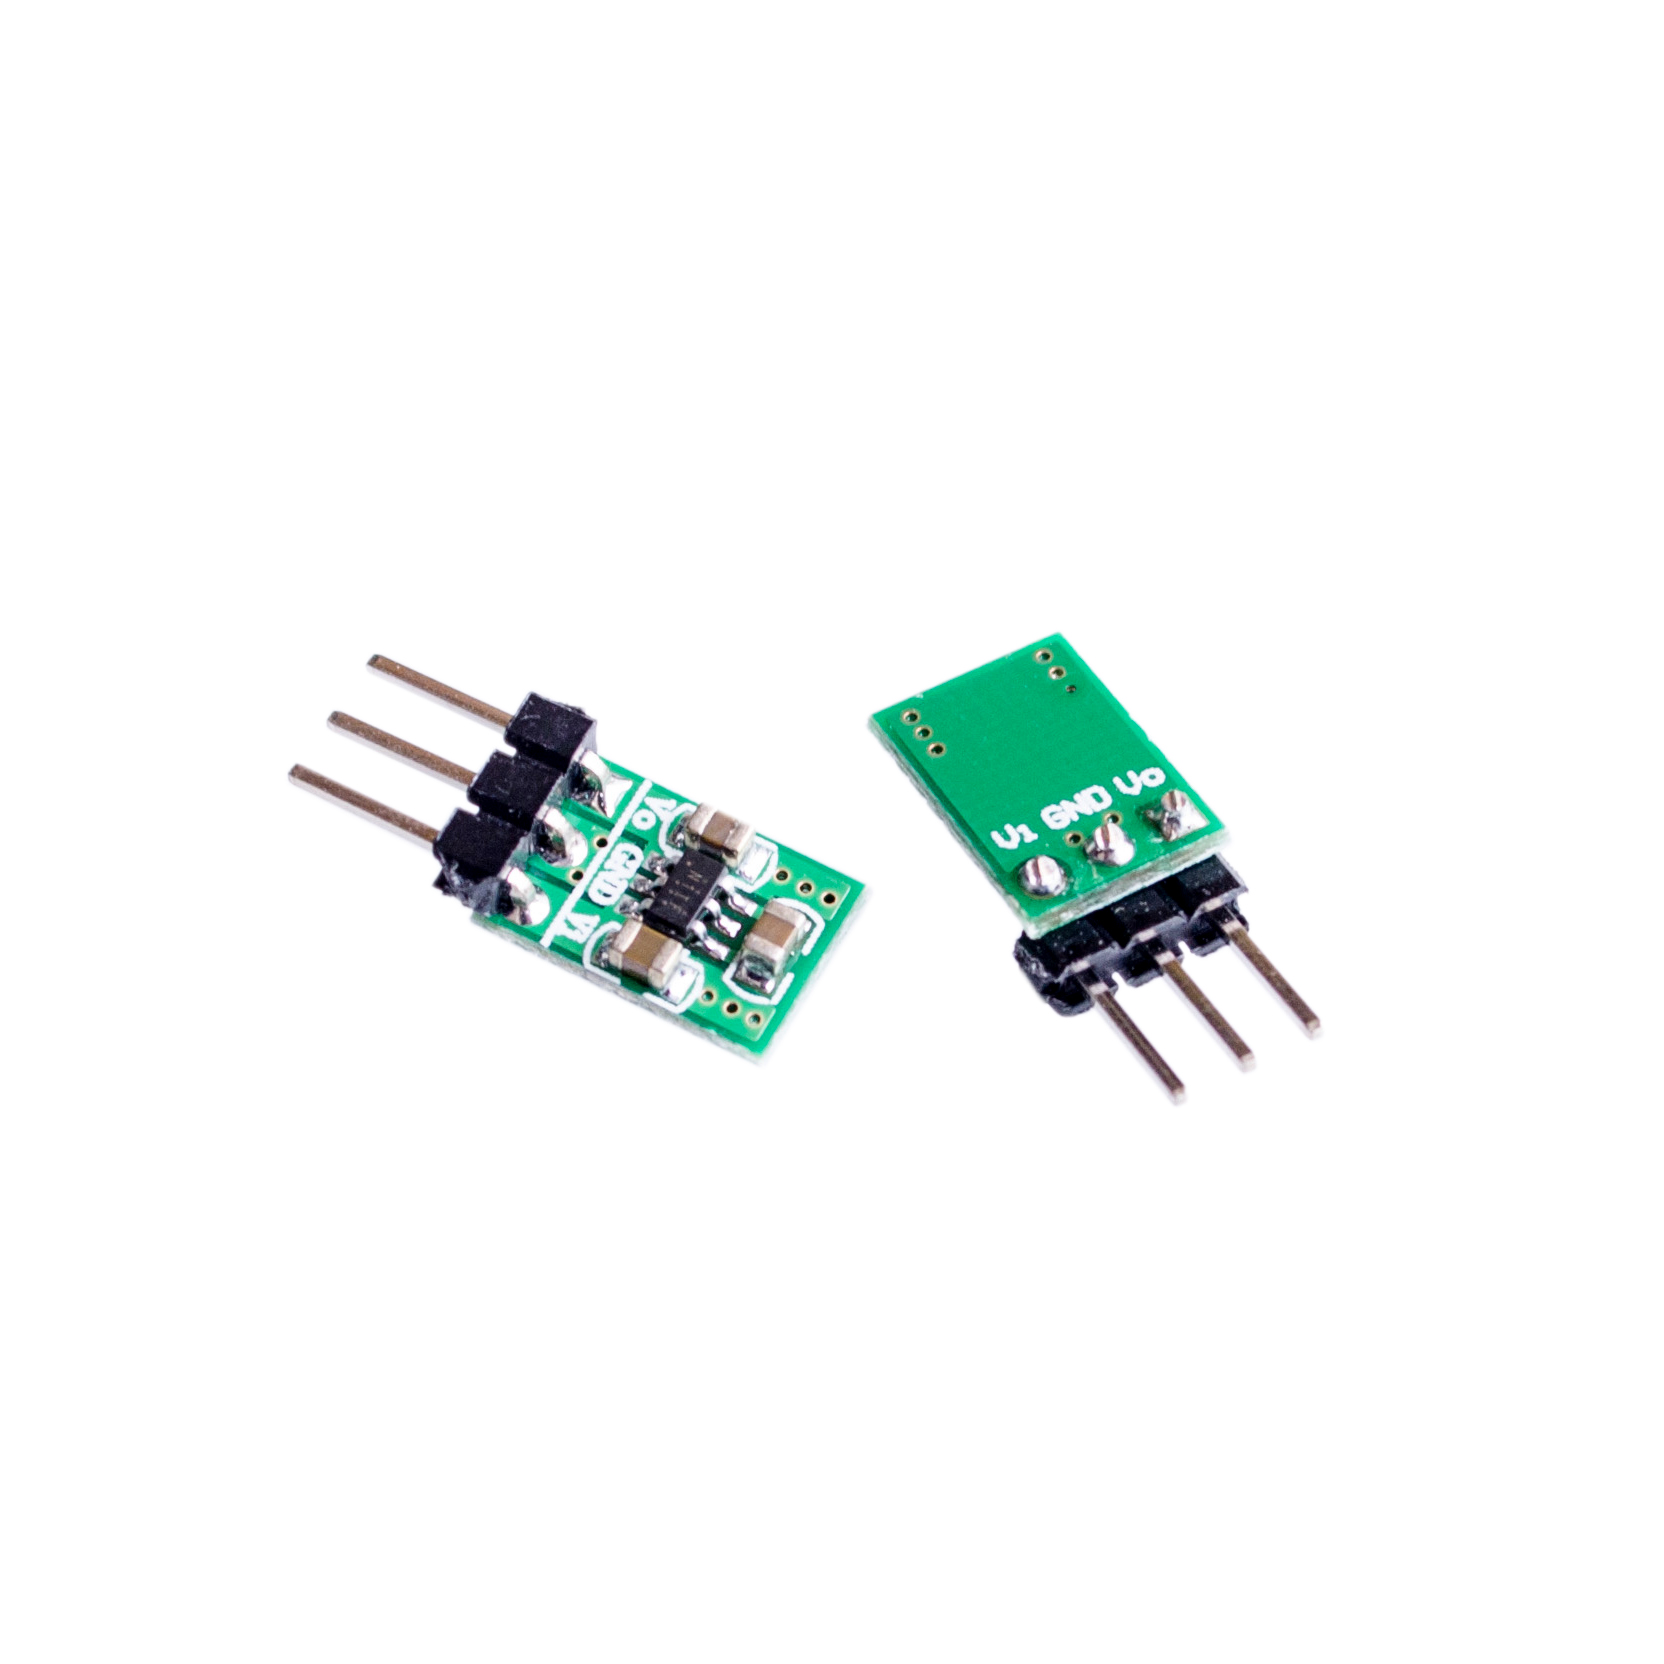 2 in1 DC-DC Buck Boost Converter 1.8-5V to 3.3V Step down Up Power Supply Module 